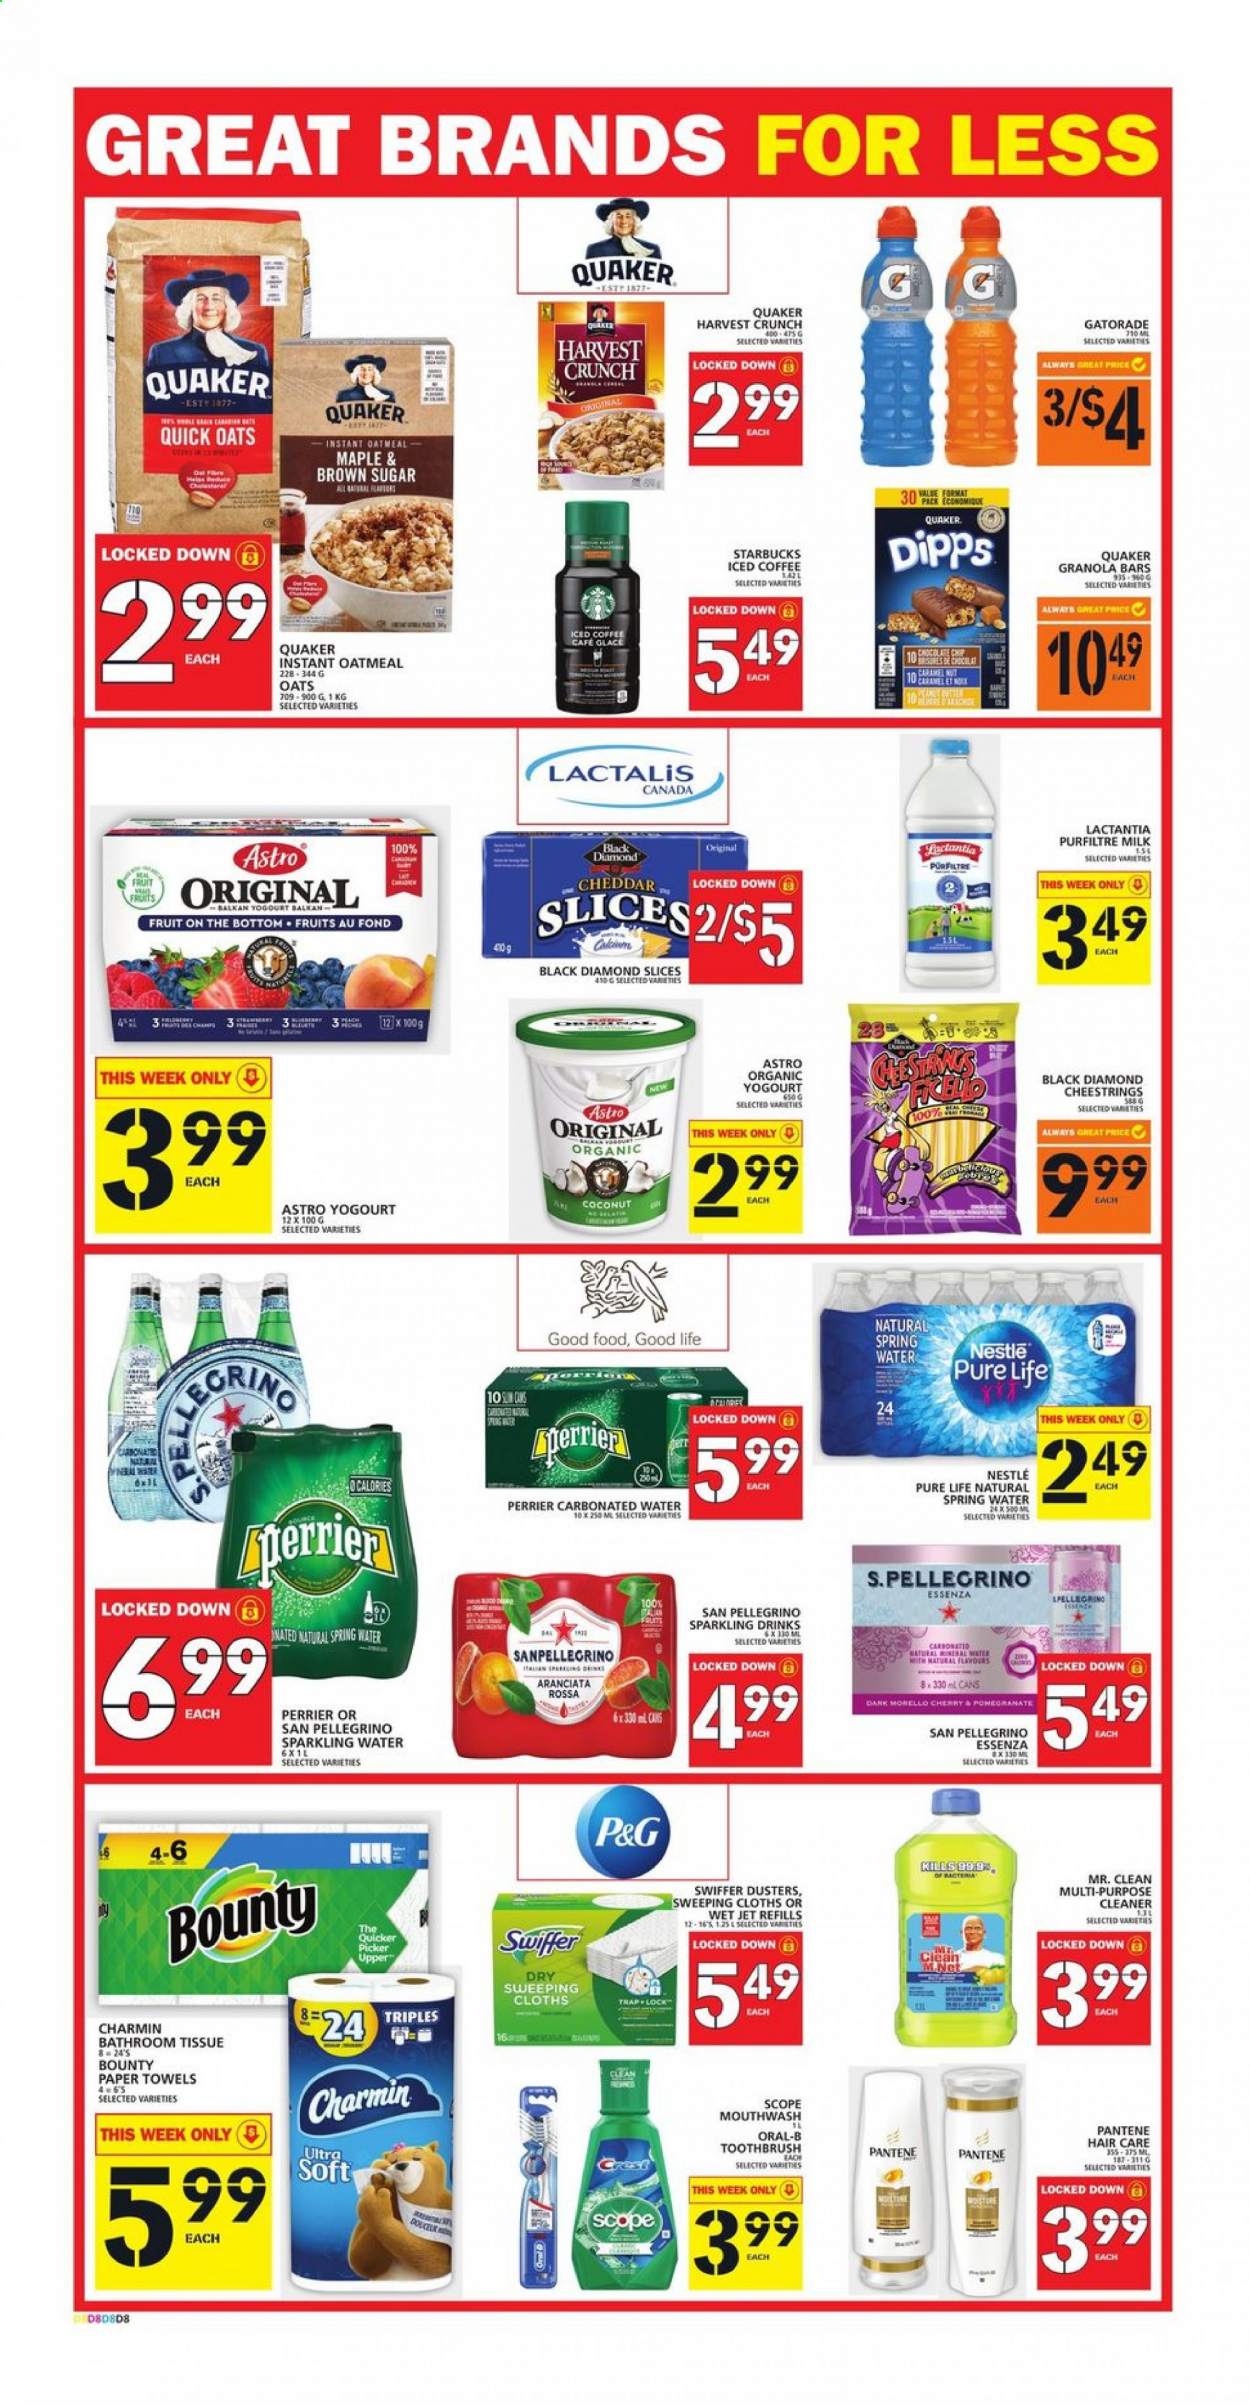 thumbnail - Food Basics Flyer - April 08, 2021 - April 14, 2021 - Sales products - pomegranate, Quaker, string cheese, cheddar, cheese, milk, Bounty, oatmeal, oats, granola bar, Quick Oats, Good Life, caramel, Perrier, Gatorade, spring water, sparkling water, San Pellegrino, iced coffee, Starbucks, bath tissue, kitchen towels, paper towels, Charmin, cleaner, Swiffer, Jet, toothbrush, mouthwash, Crest, Nestlé, Pantene, Oral-B. Page 9.